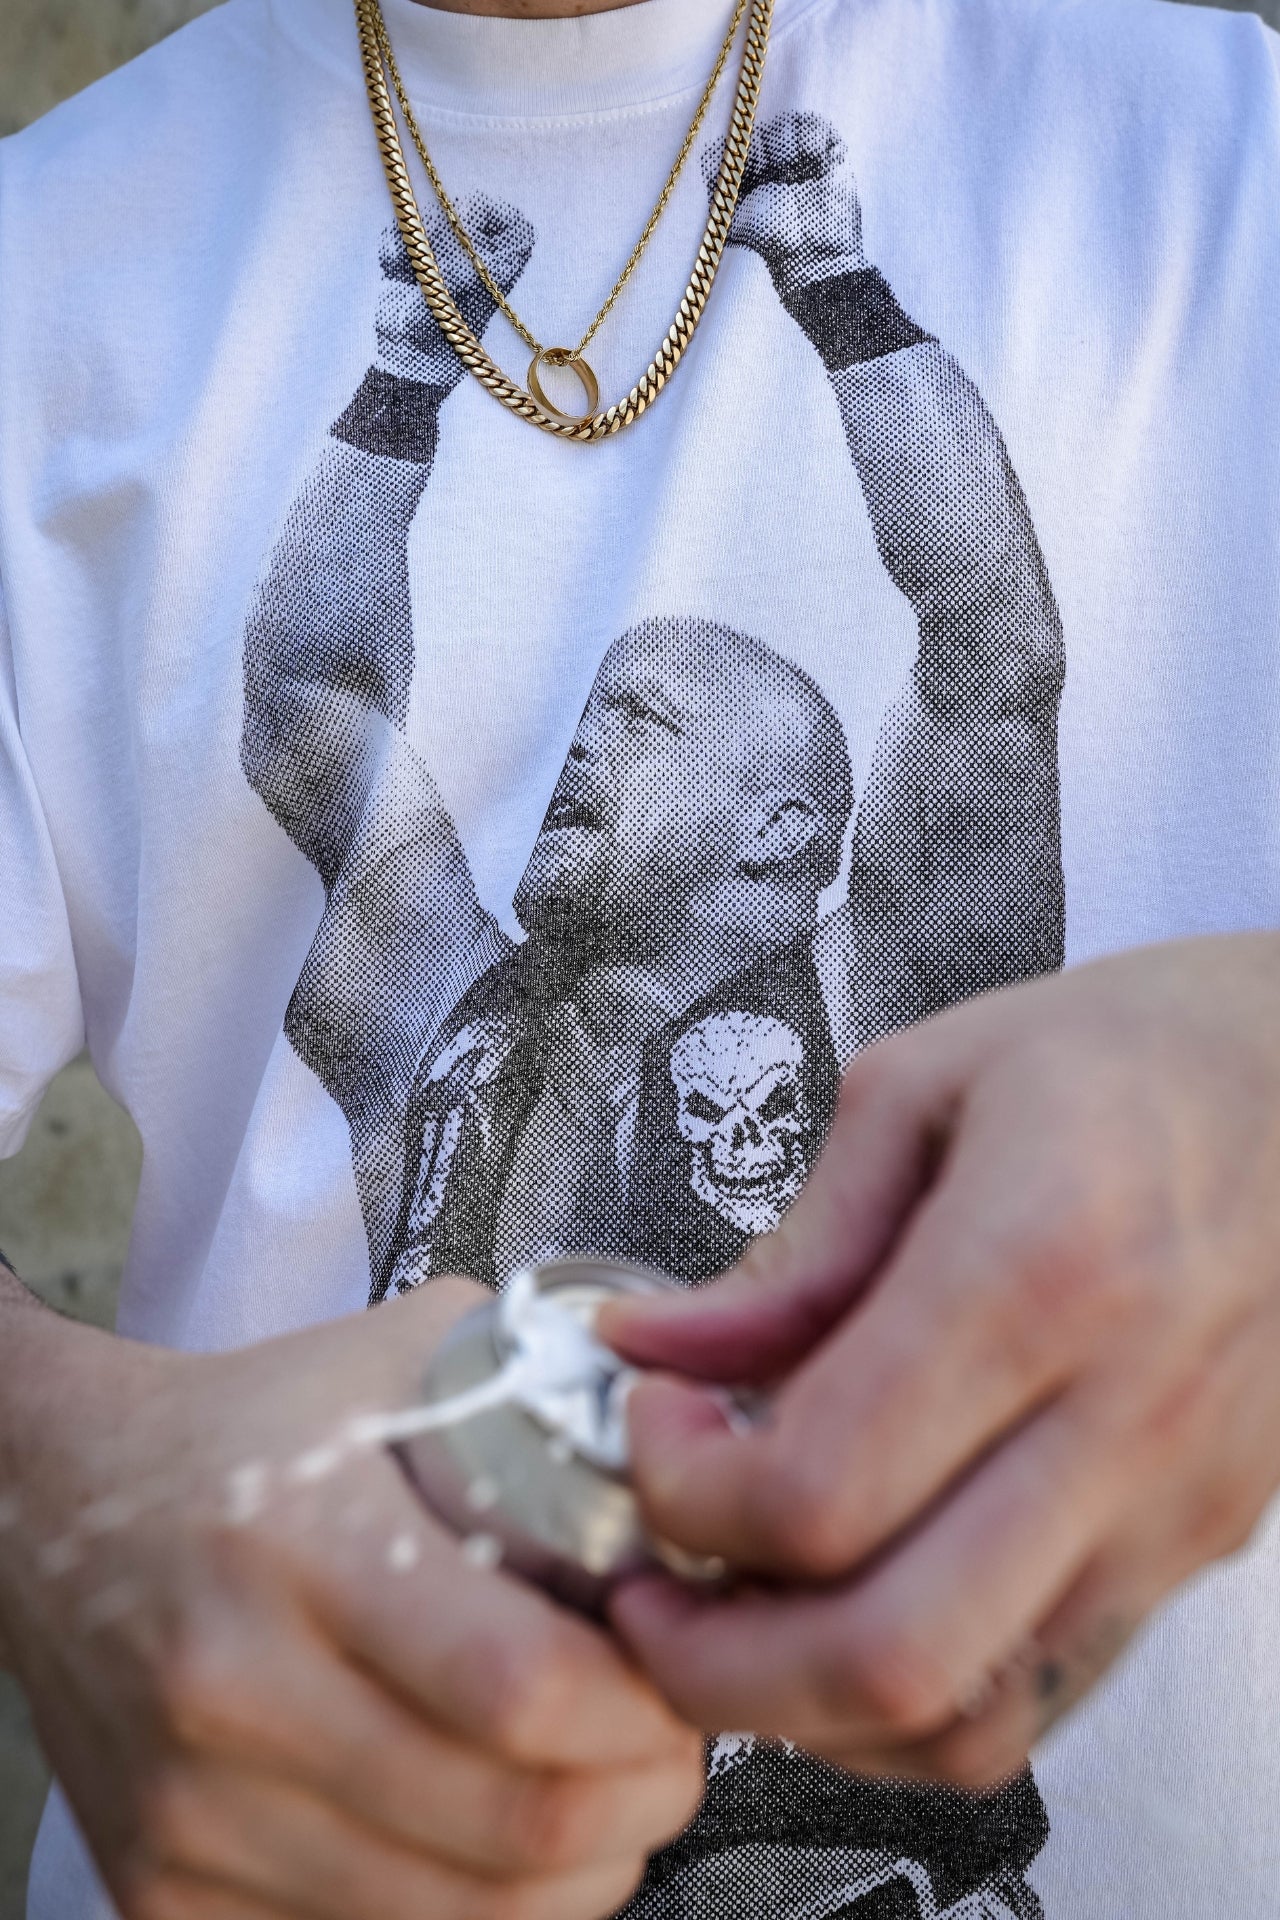 EARLY ACCESS: UNCIVILIZED "STONE COLD" T-SHIRT